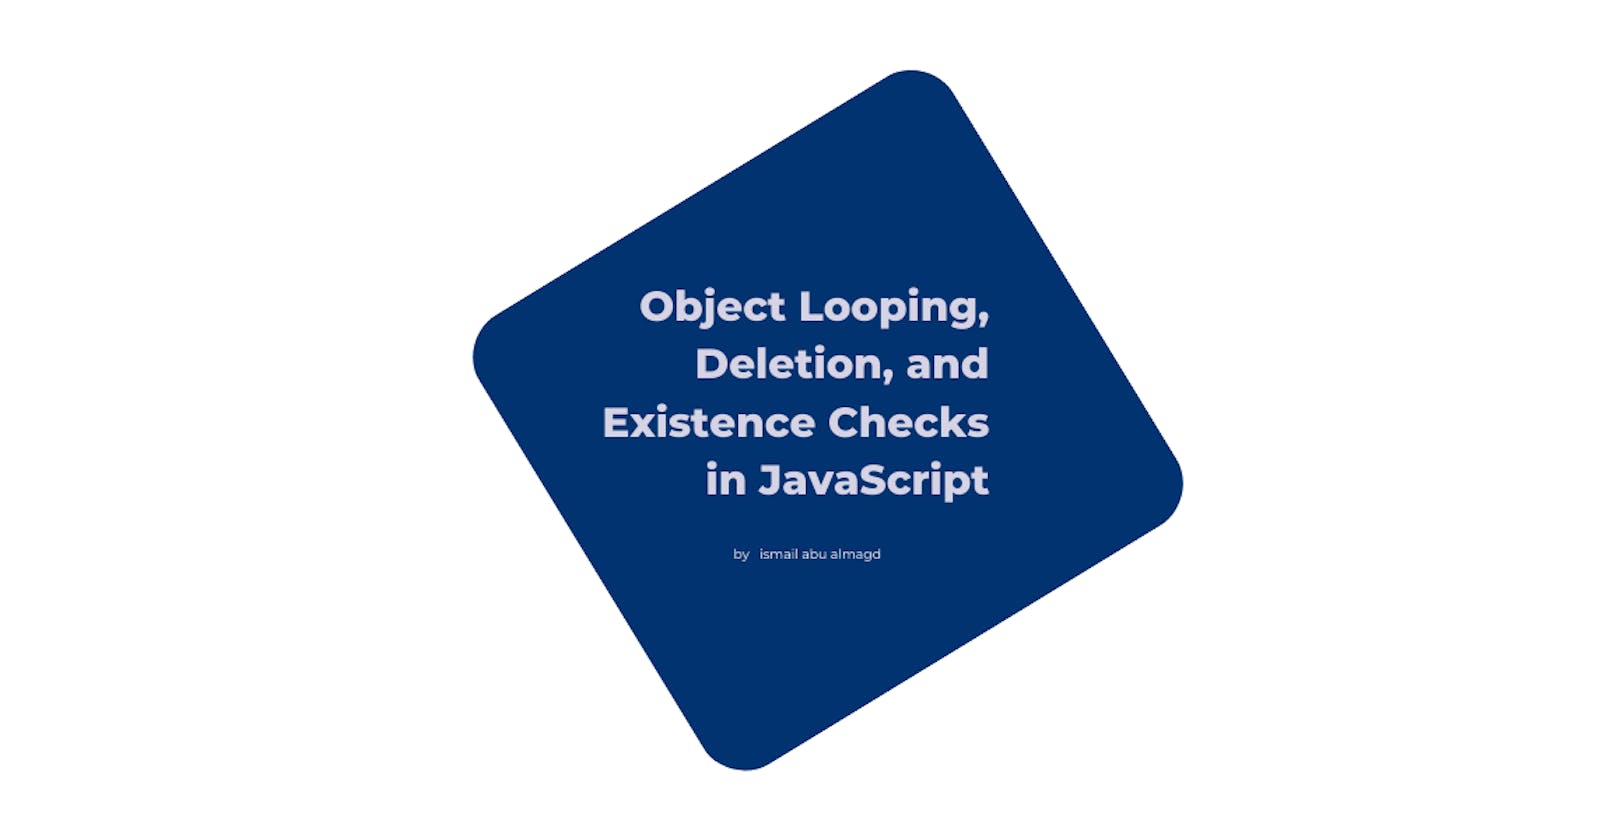 Efficient Object Looping, Deletion, and Existence Checks in JavaScript